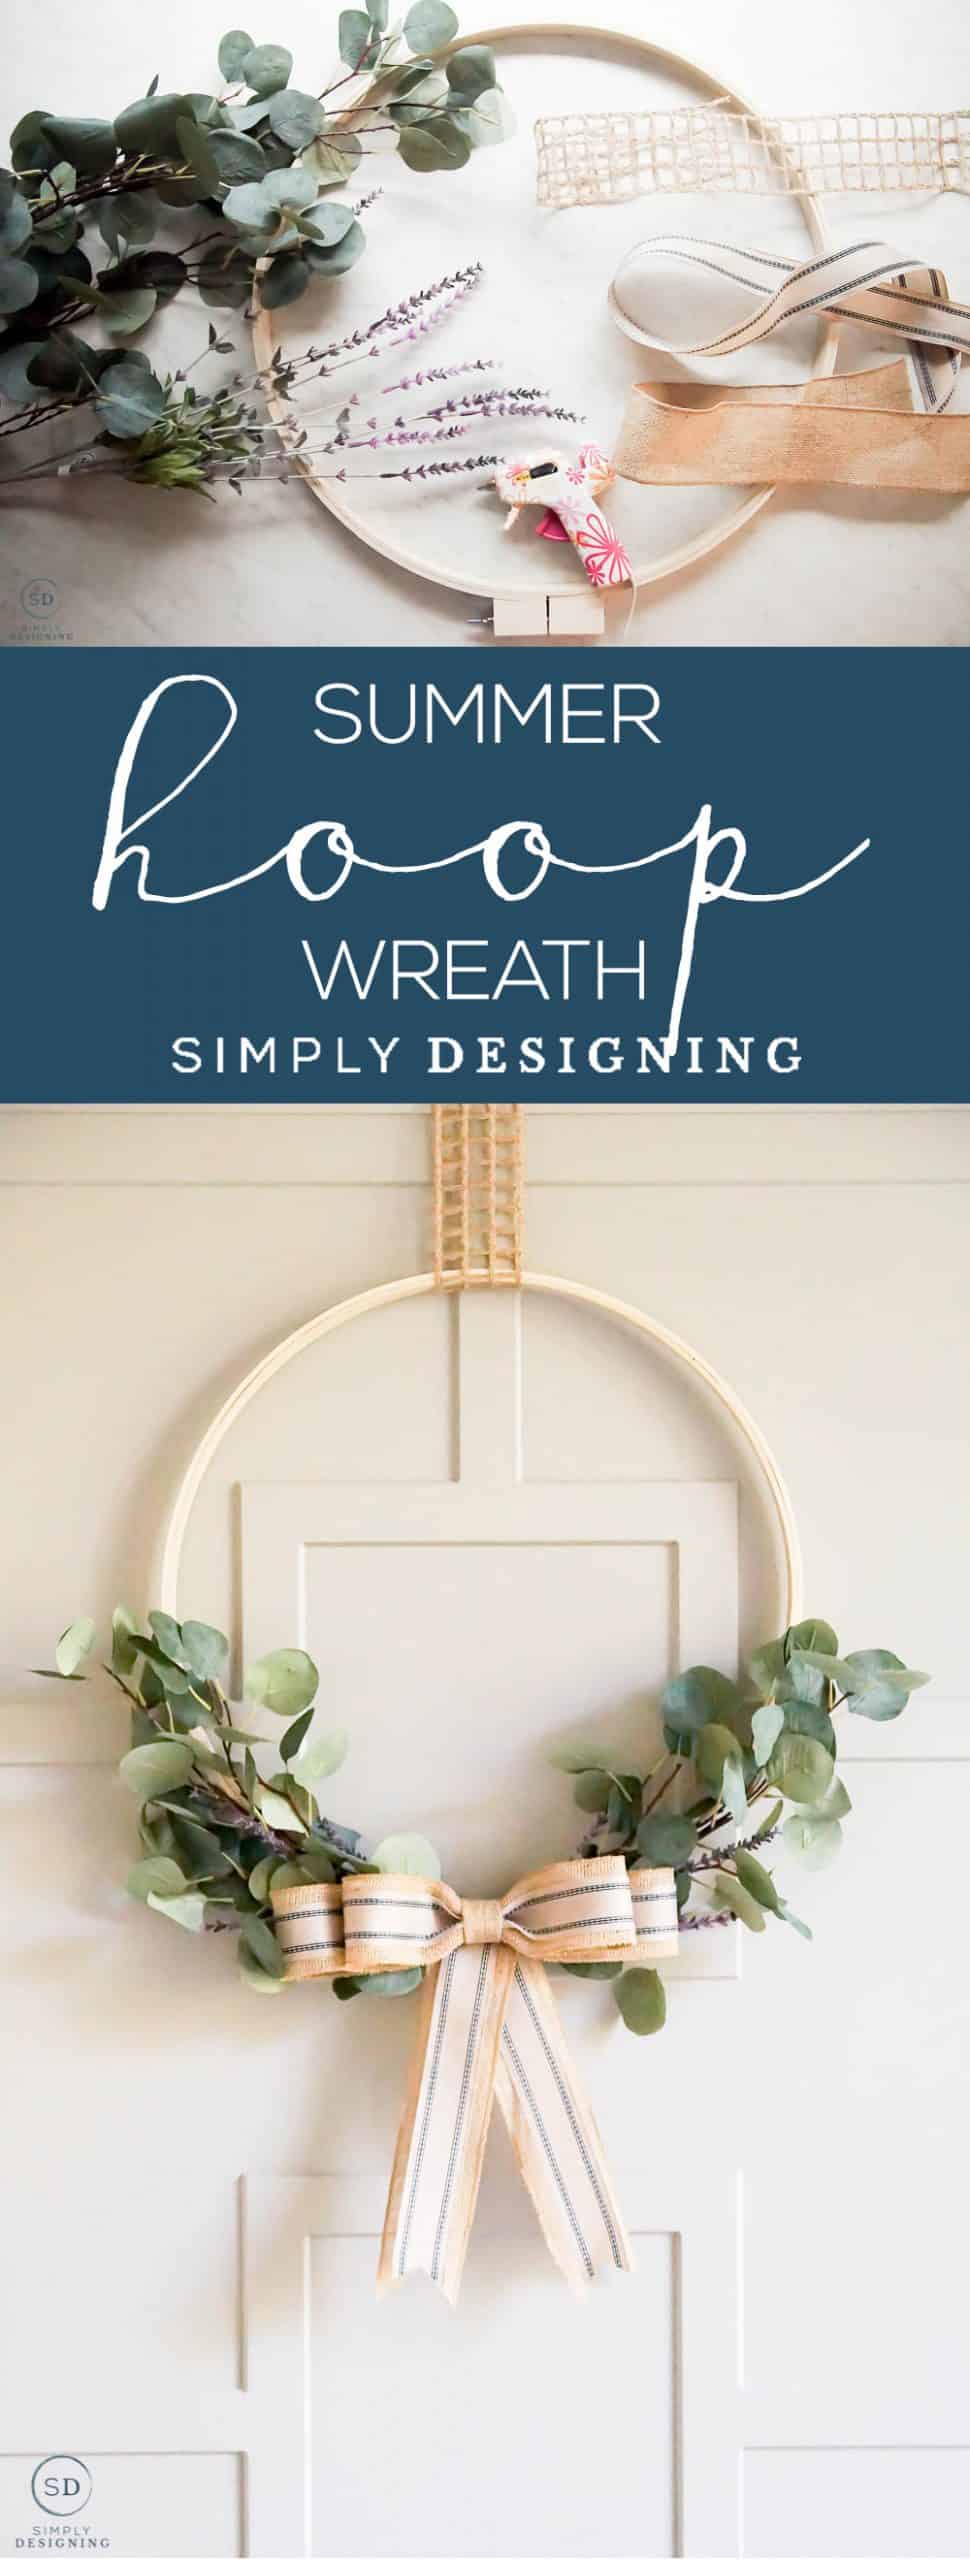 Summer Hoop Wreath - This beautiful Summer Hoop Wreath is a simple homemade wreath that you can easily make yourself with only a few supplies and not a lot of time